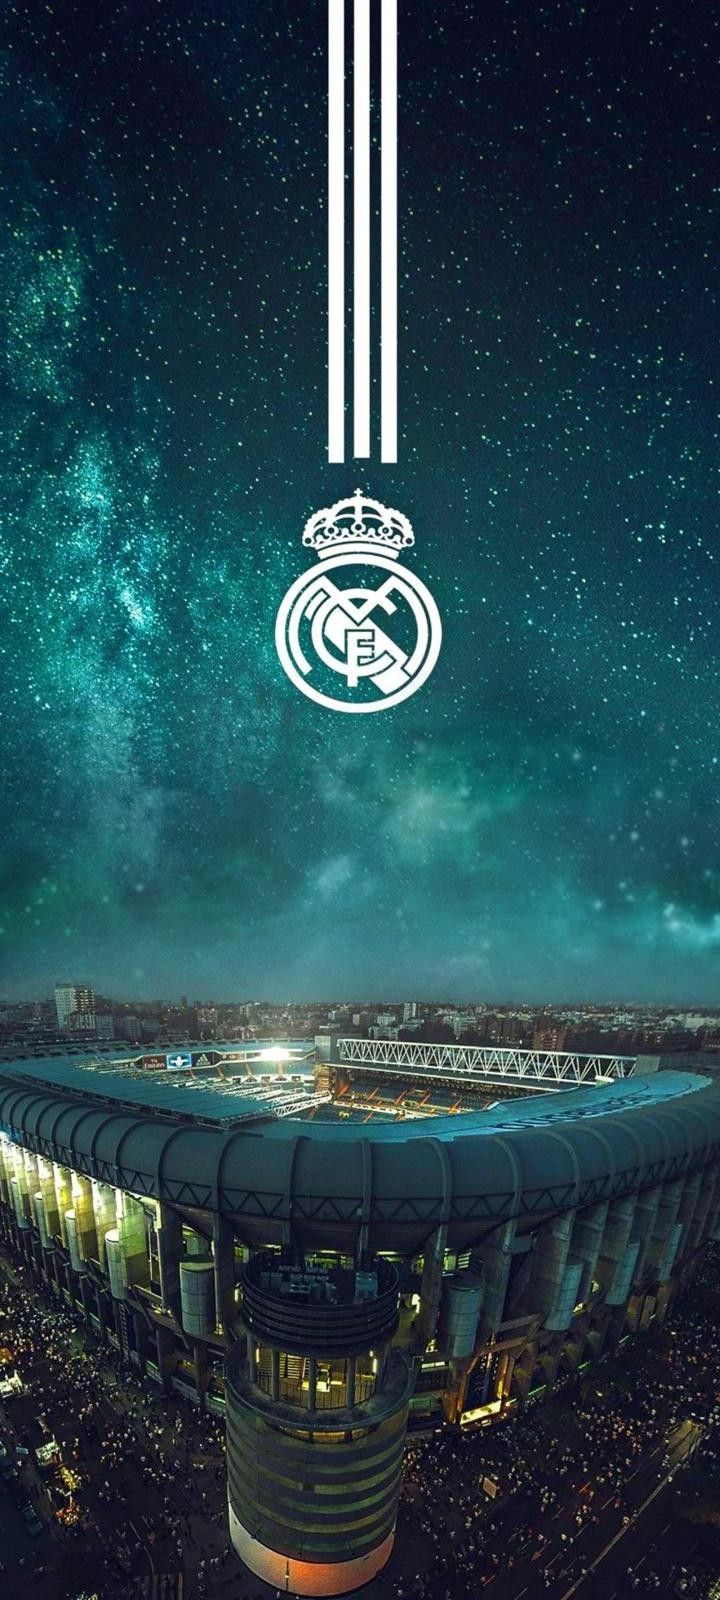 Free download, Madrid, Real, Real Madrid, Real Madrid Logo, real madrid wallpapers 4k, Wallpaper, wallpapers iPhone - Real Madrid Logo in 4K Splendor: A Wallpaper Showcase